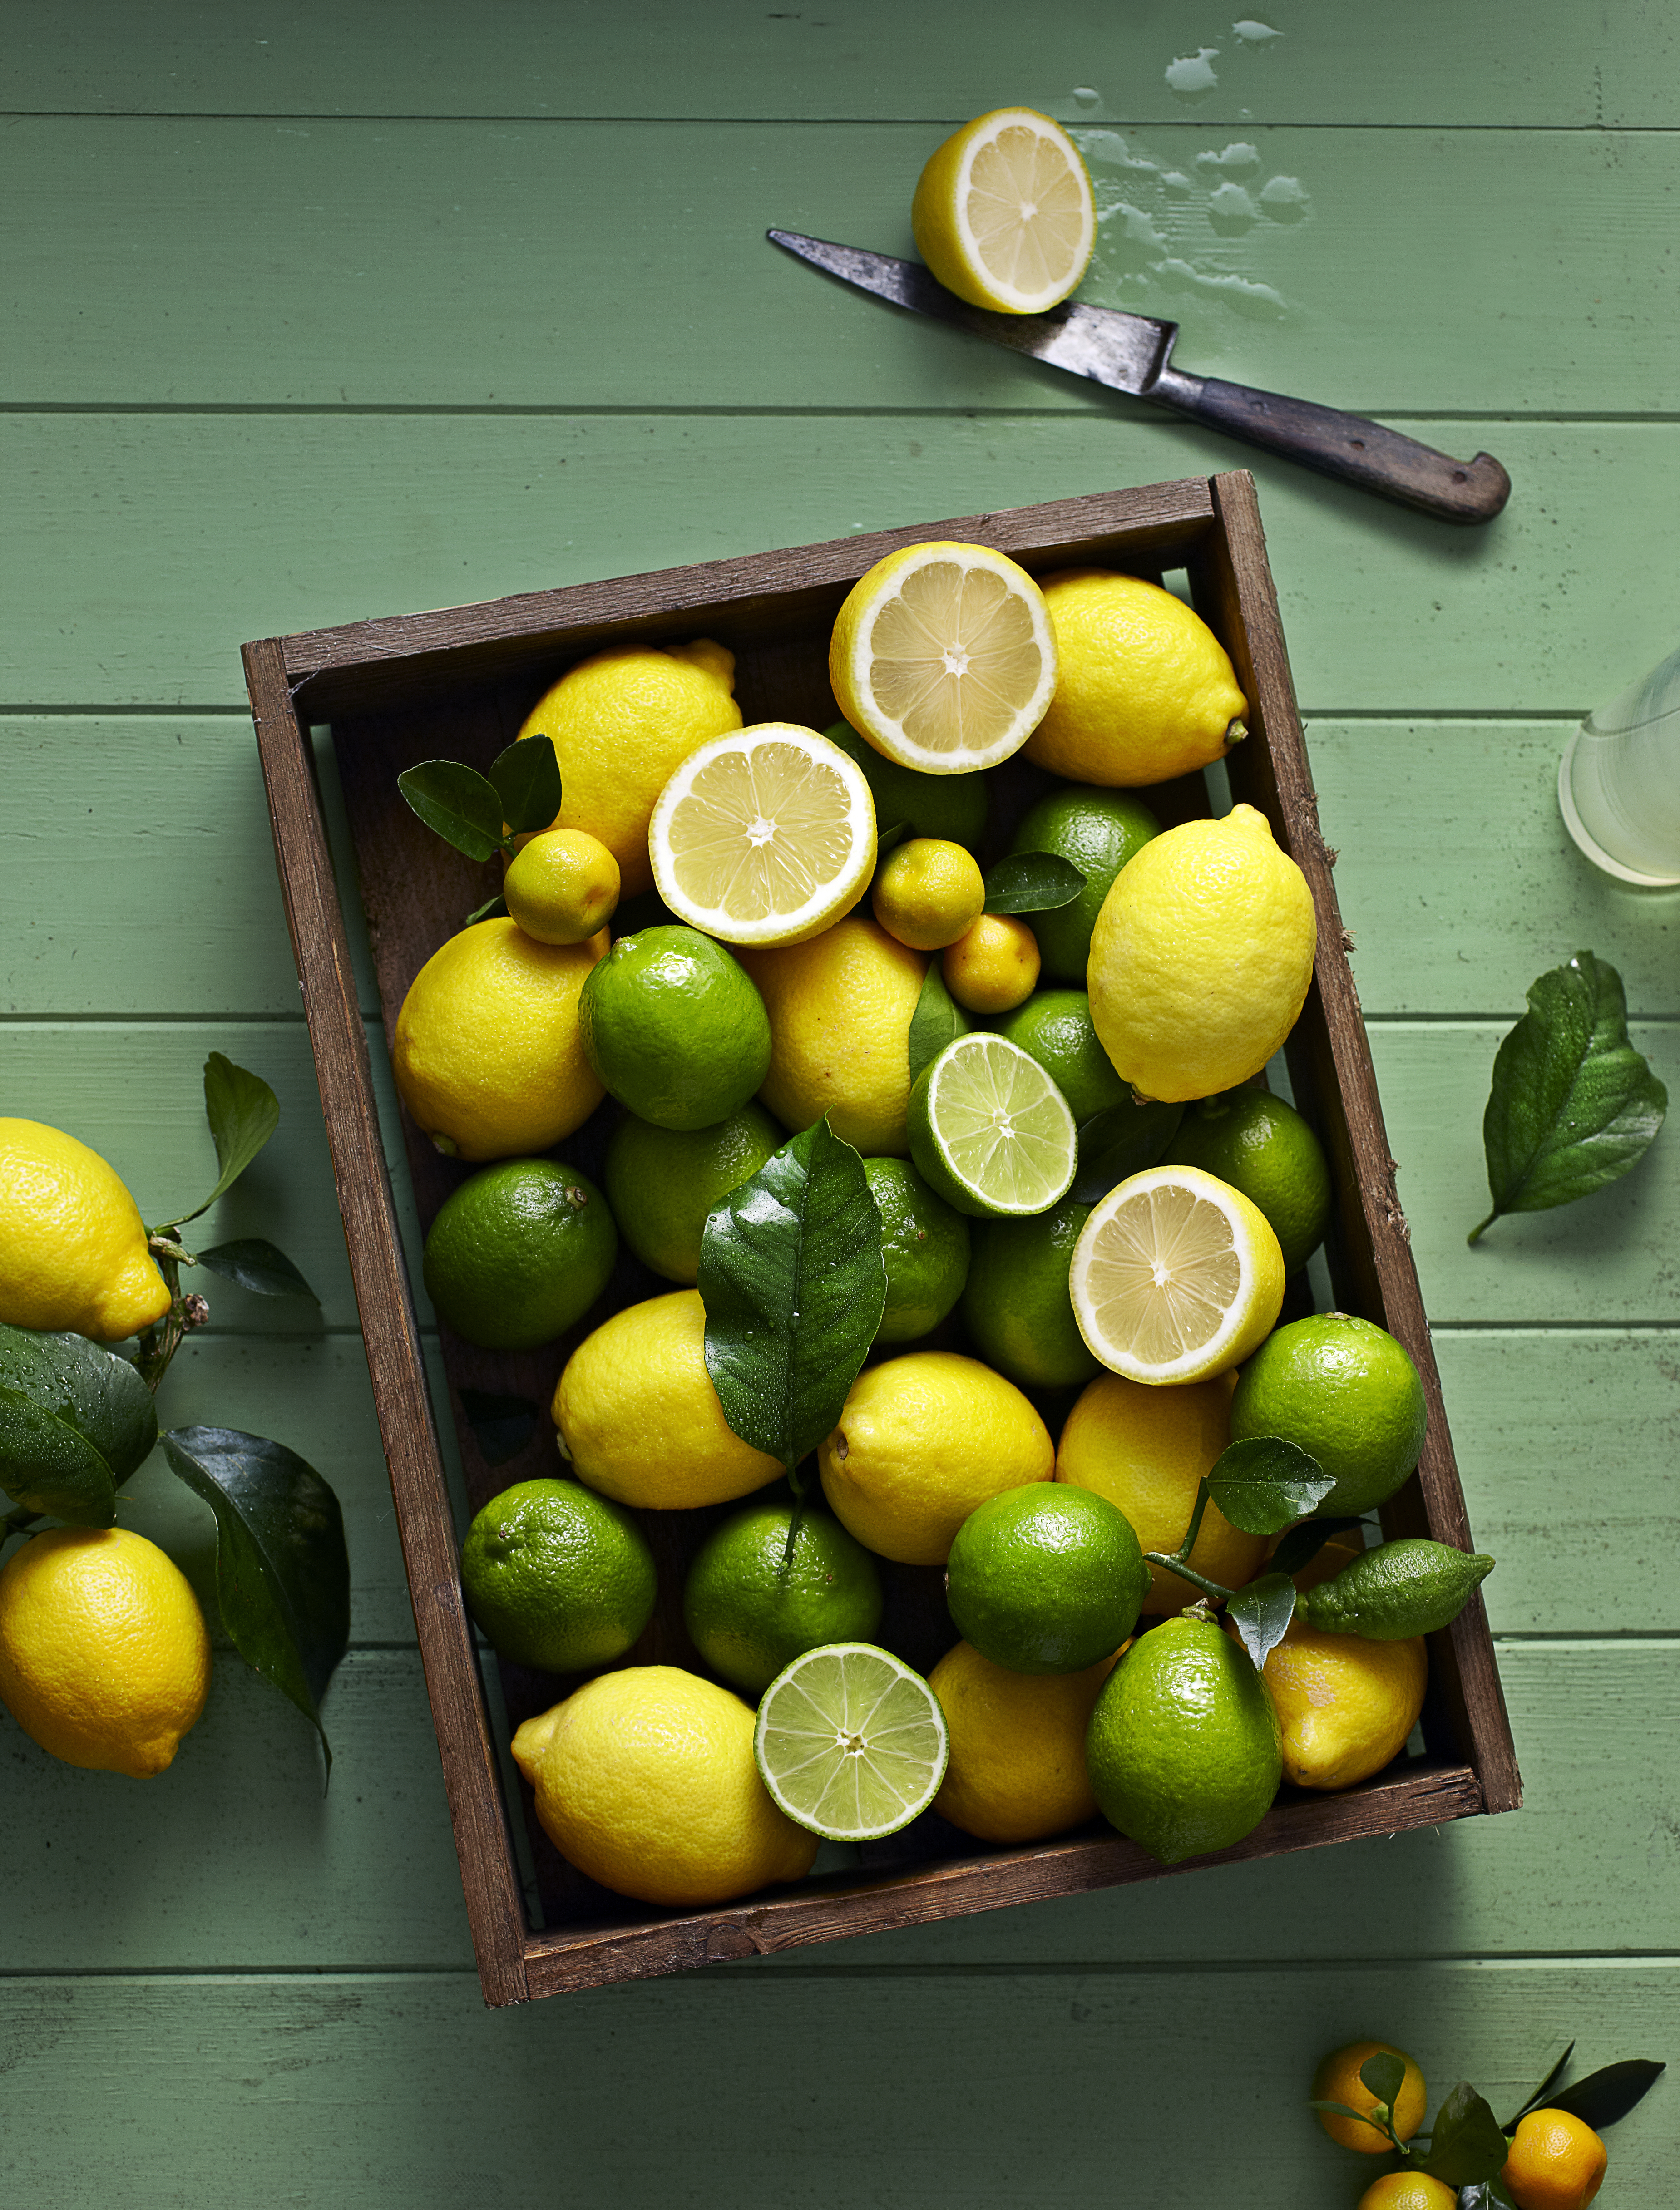 A box of lemons and limes. | Source: Getty Images